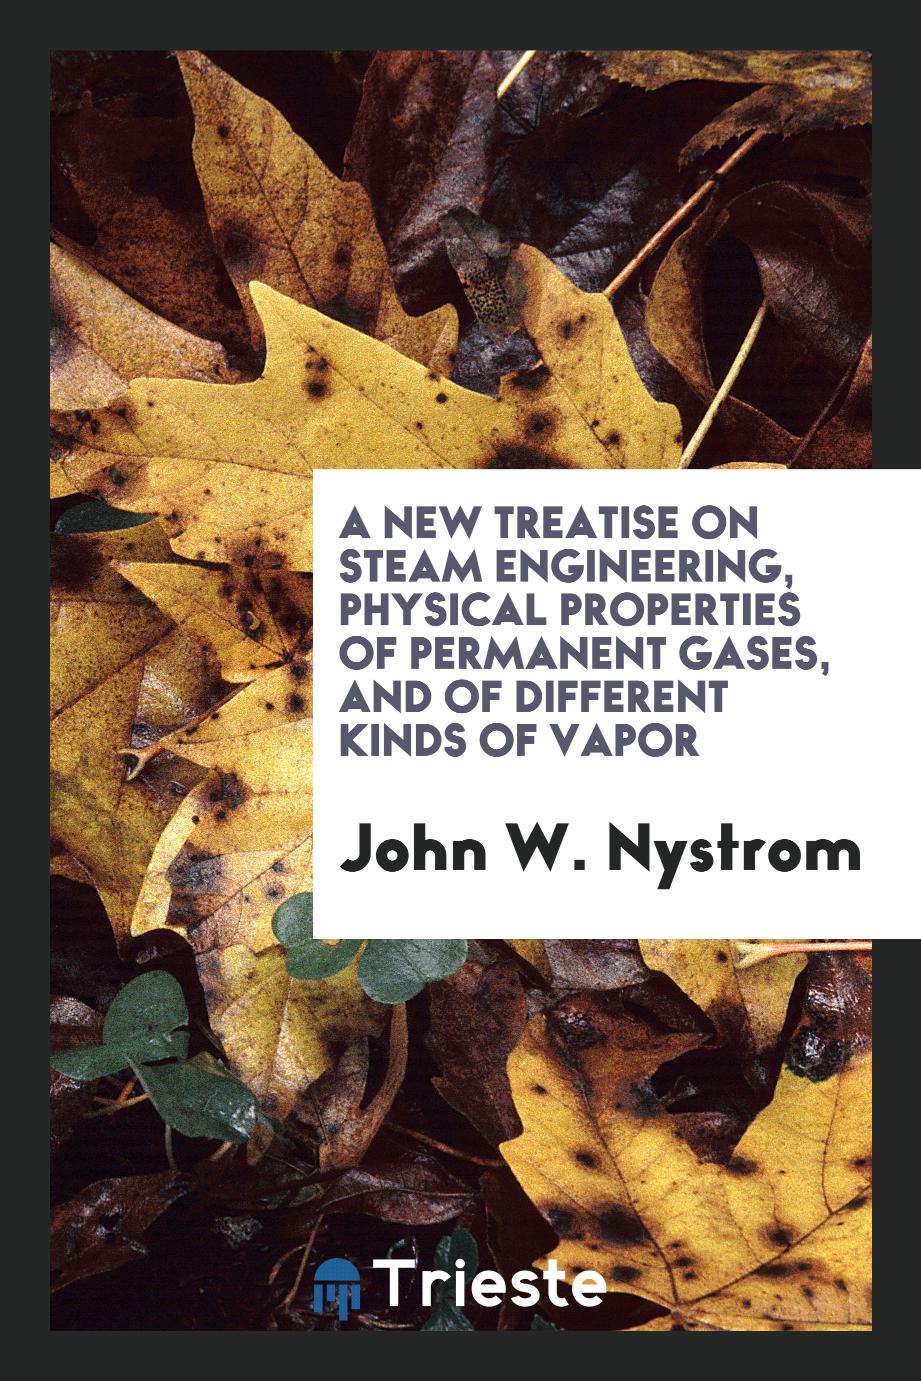 A new treatise on steam engineering, physical properties of permanent gases, and of different kinds of vapor